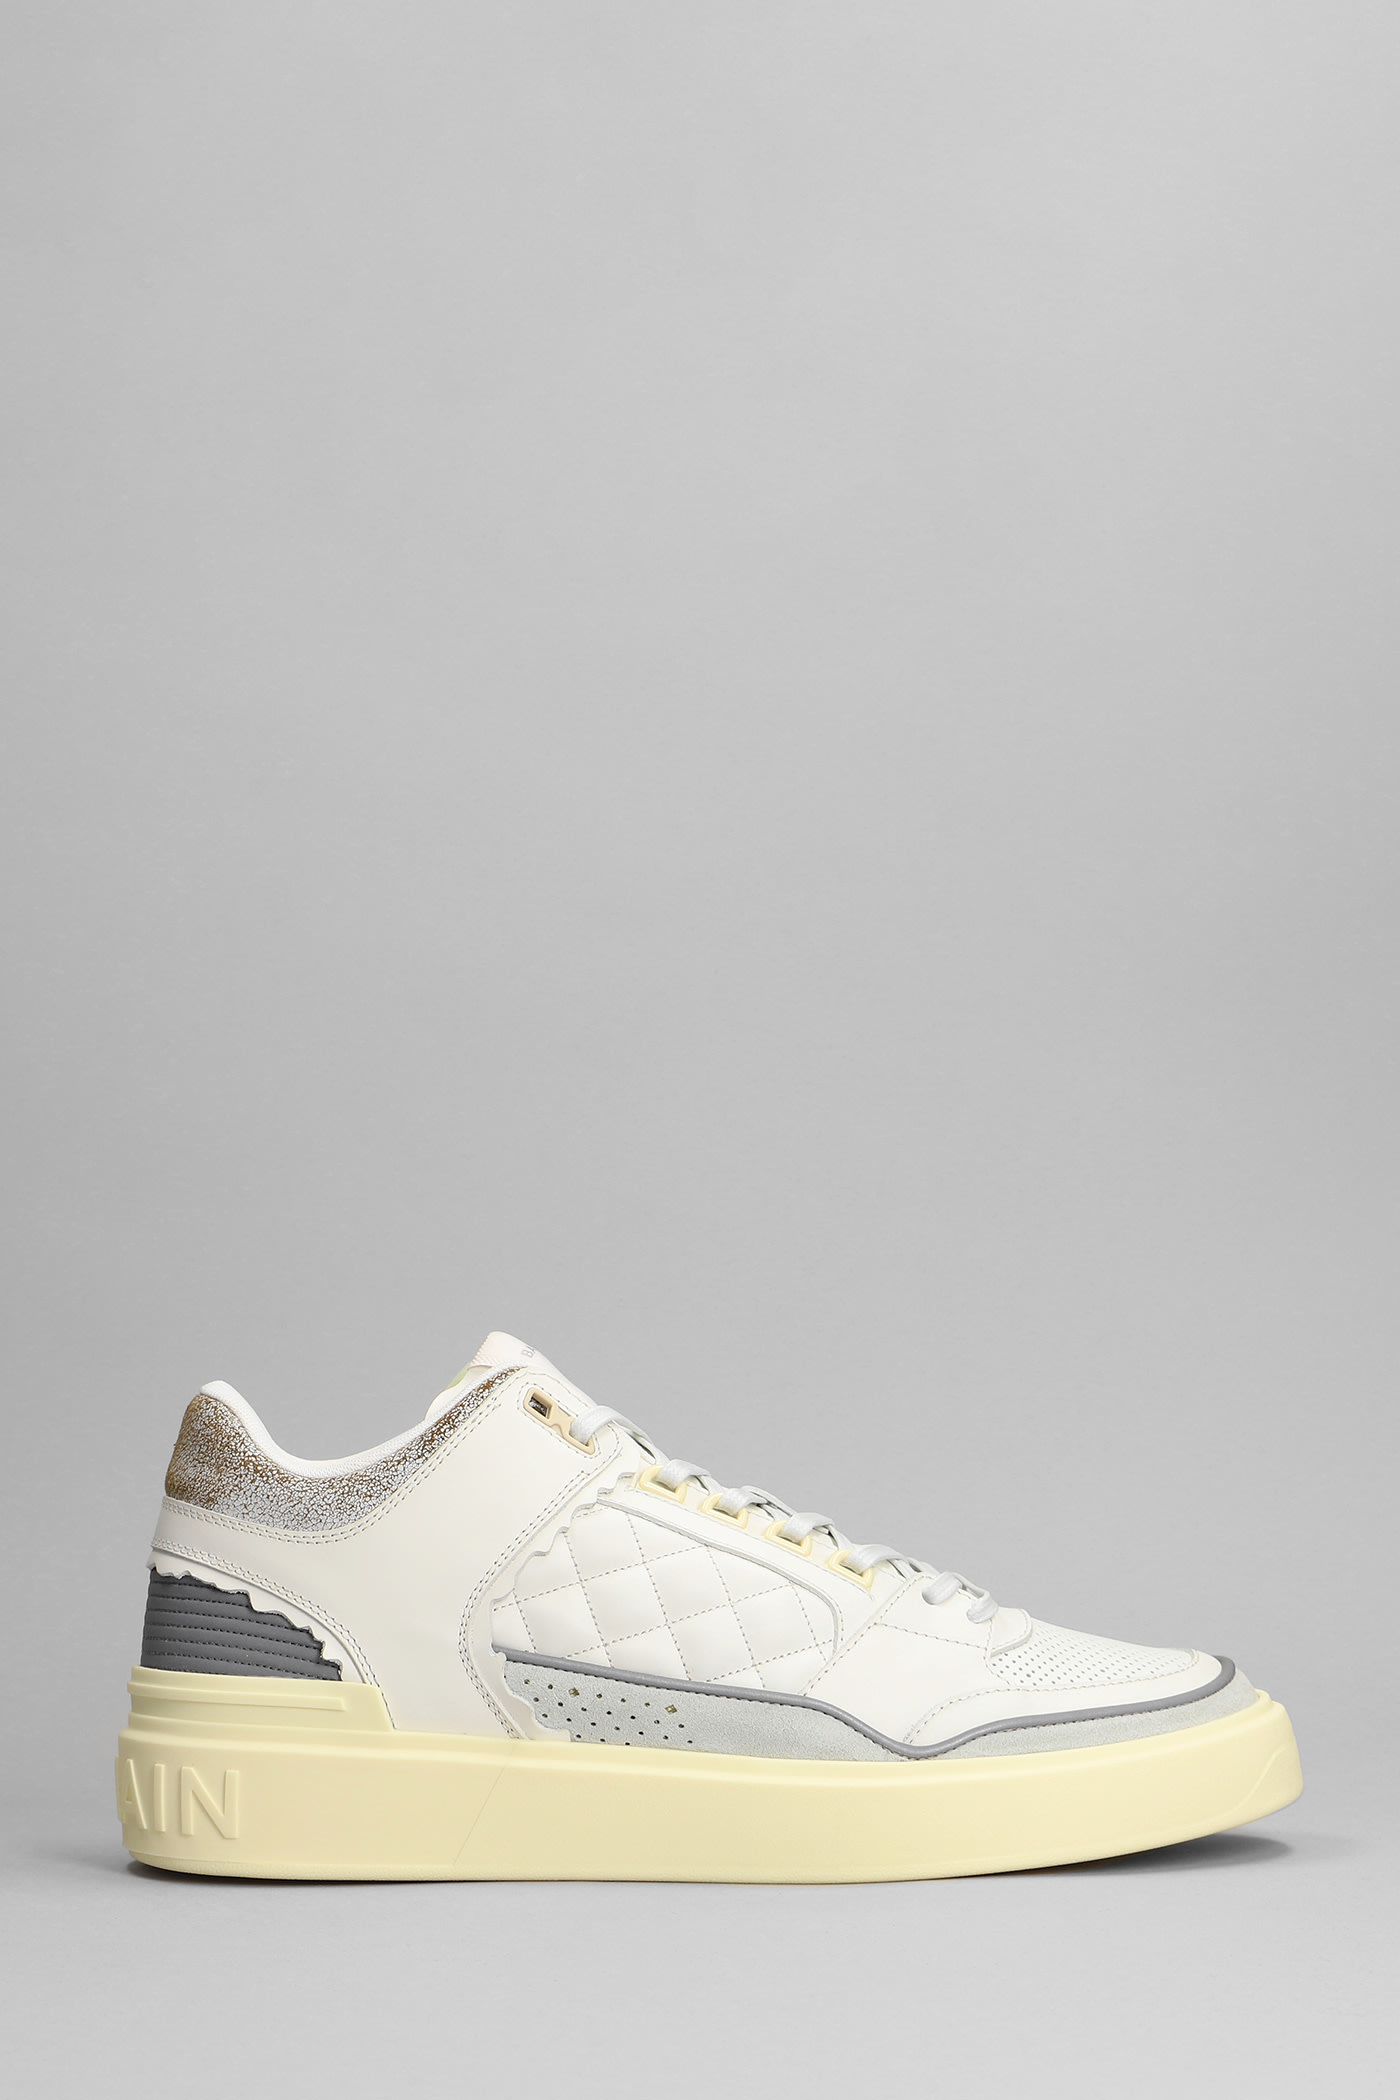 Timeless Elegance: Balmain White Quilted Leather Sneakers